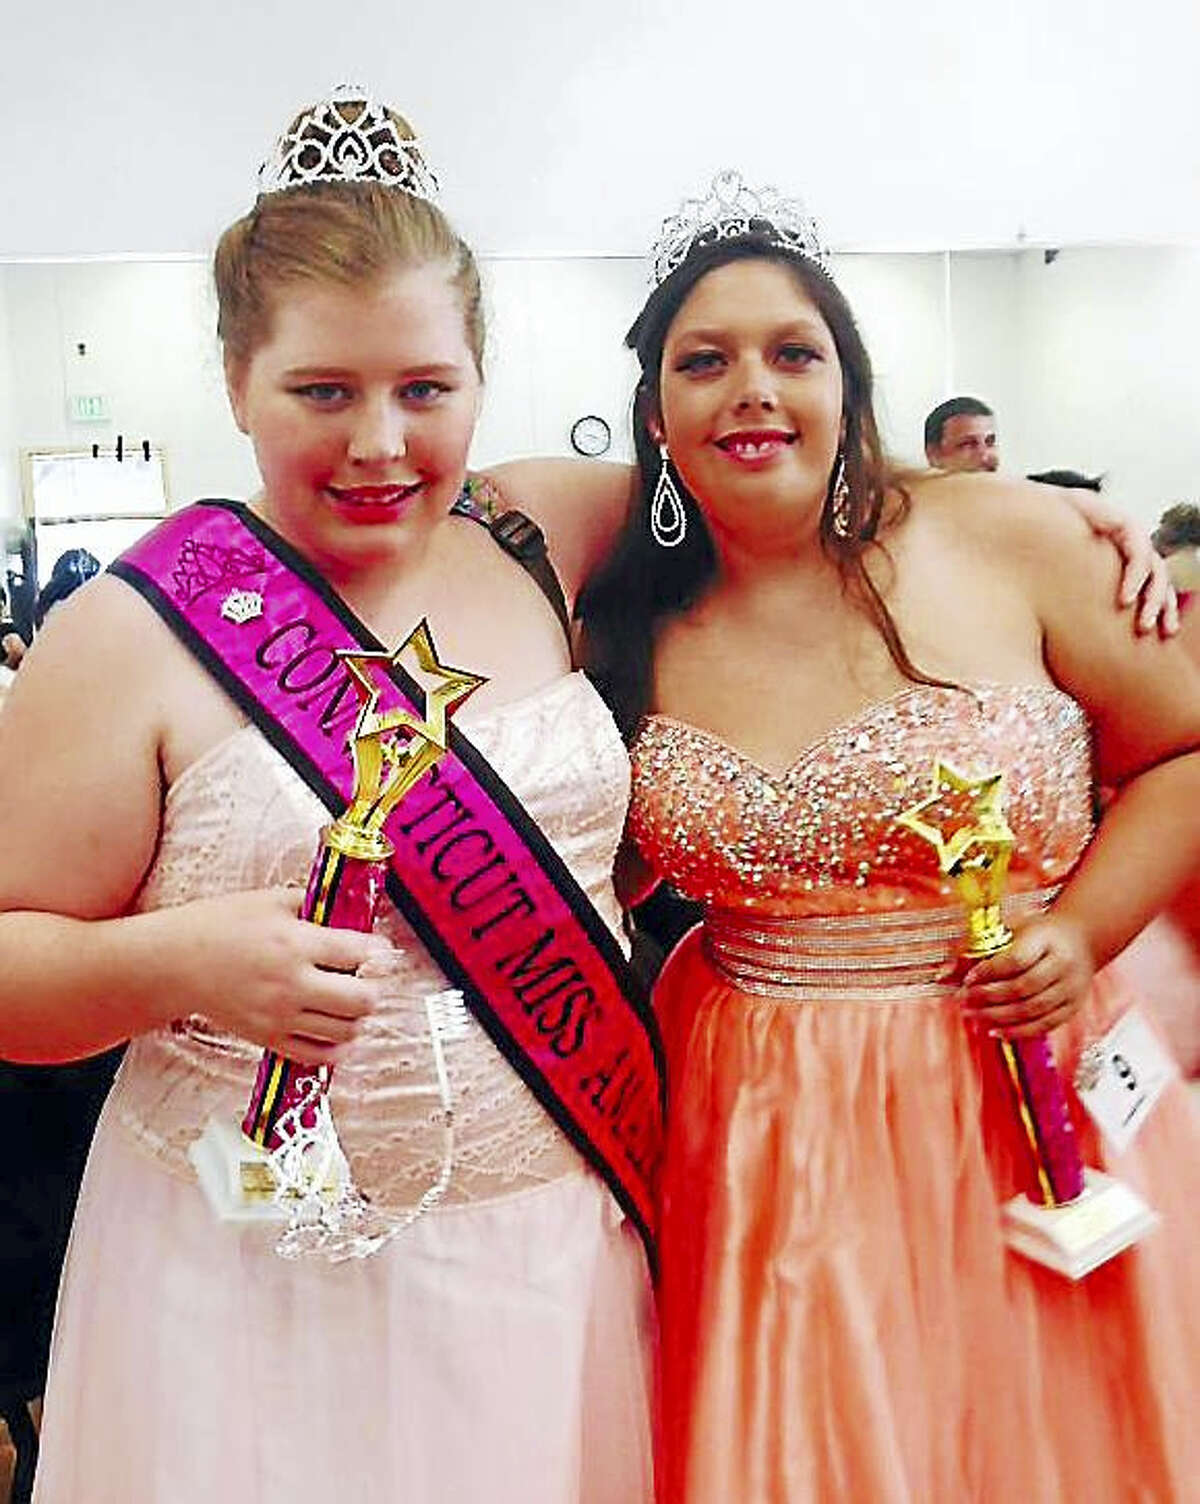 Mya Deshaw, 17, Miss Amazing Teen Queen Connecticut poses with Miss Amazing Teen Queen Mississippi after the 2015 national pageant.